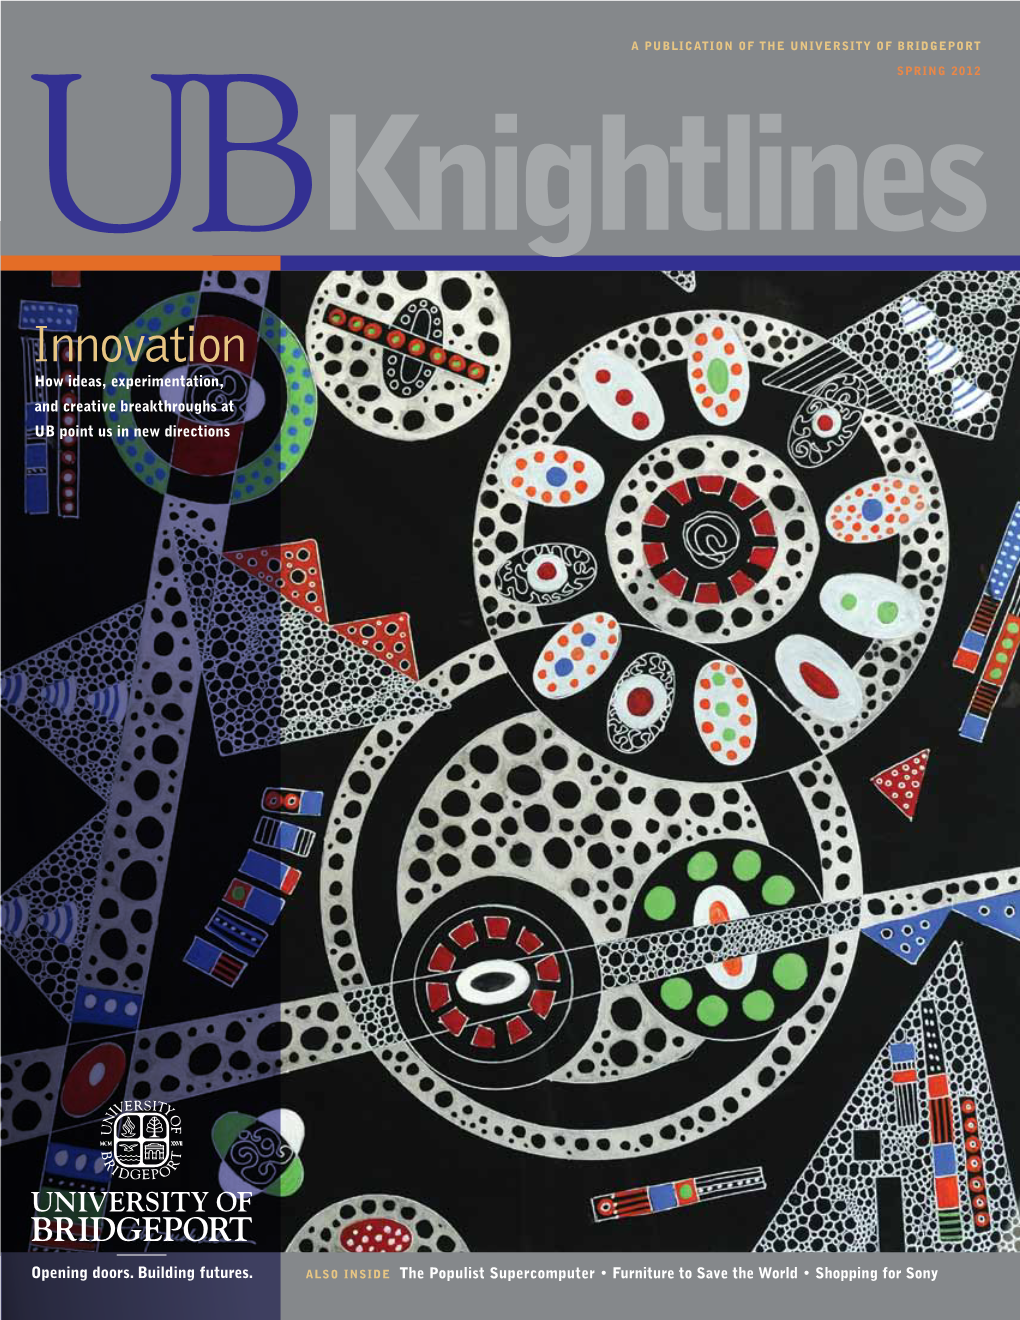 Innovation How Ideas, Experimentation, and Creative Breakthroughs at UB Point Us in New Directions 